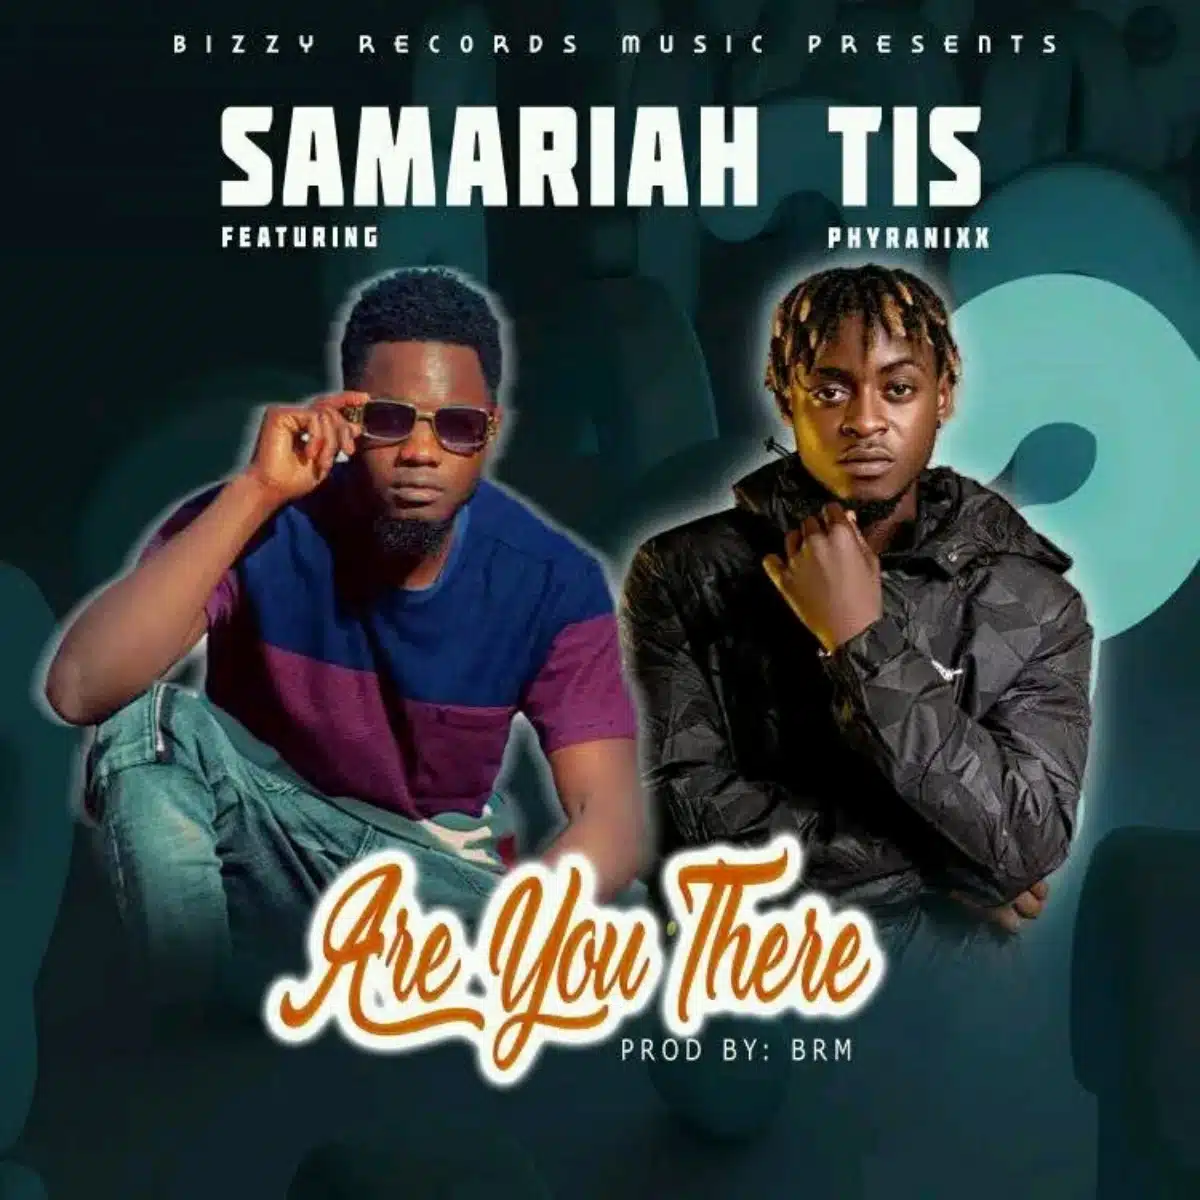 DOWNLOAD: Samariah Tis Ft Phyranixx – “Are You There” Mp3